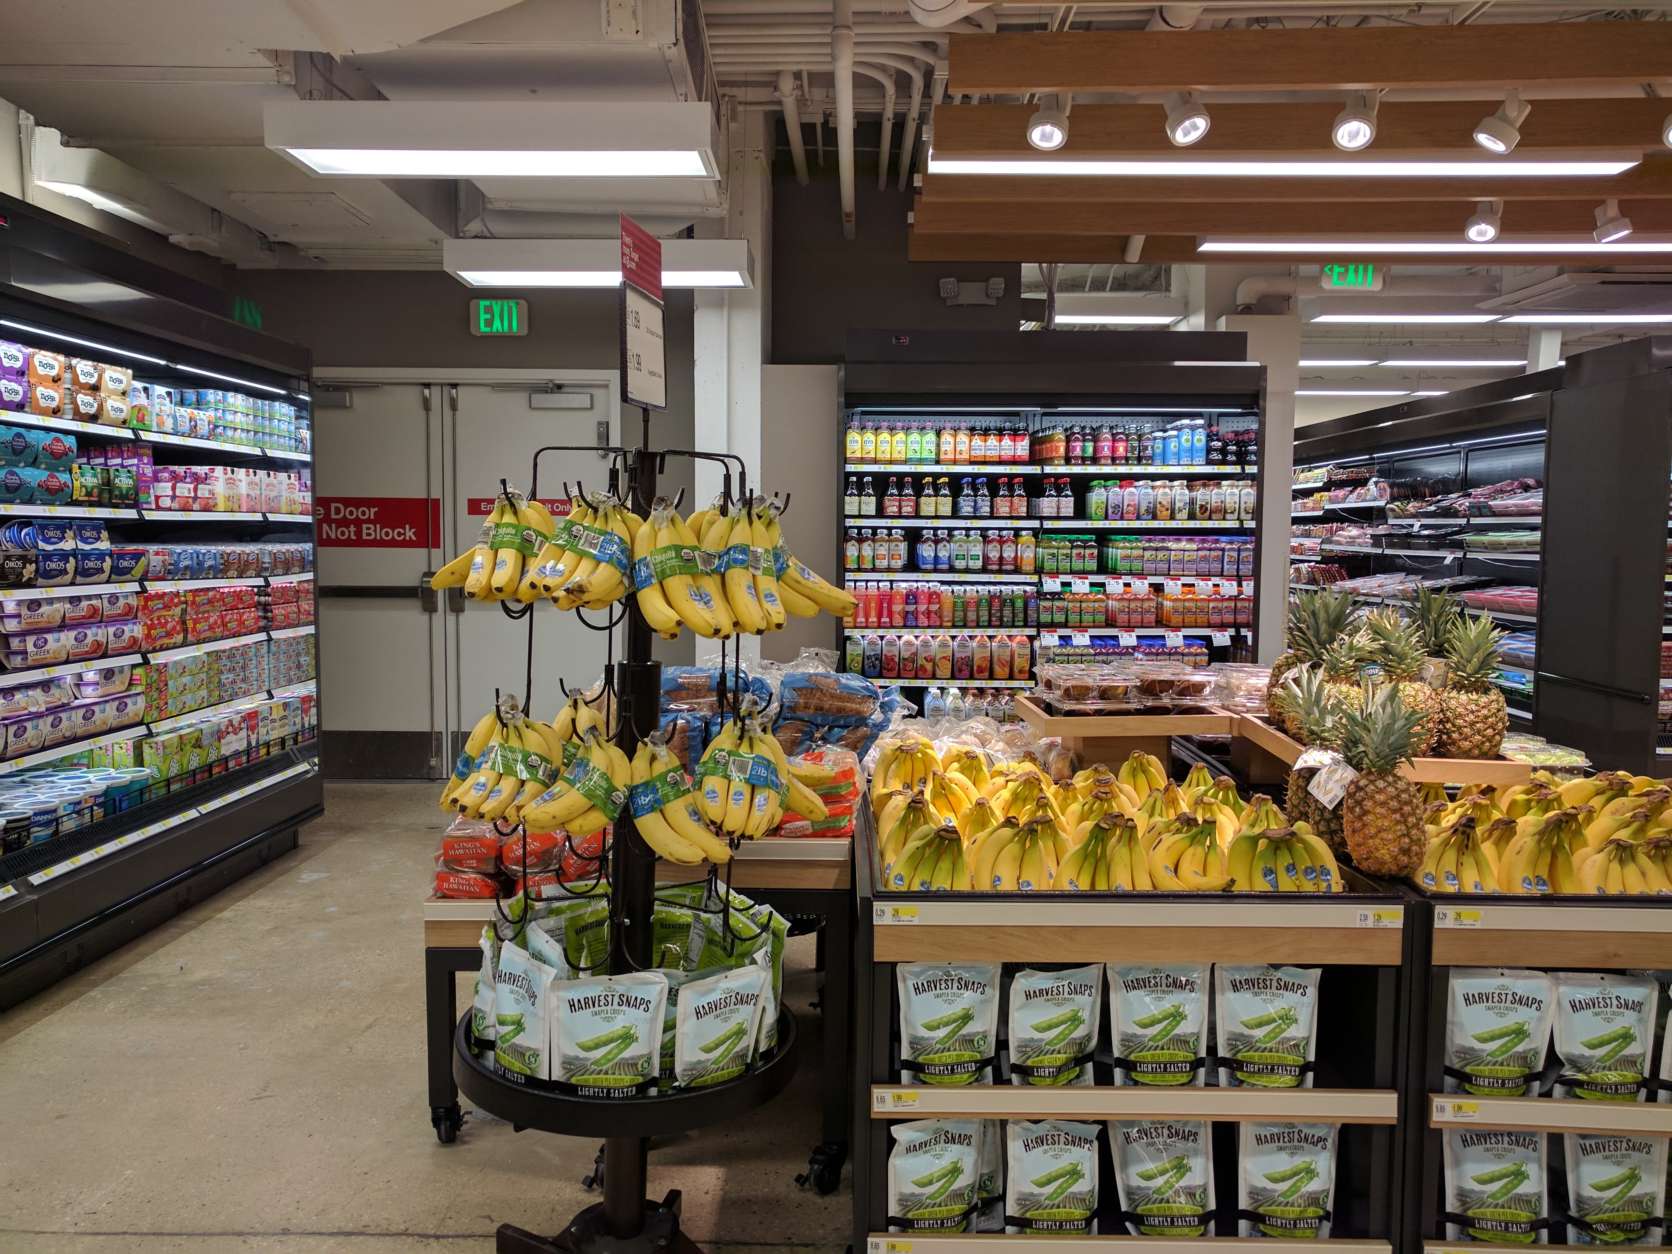 "We have a full grocery selection; we have all apparel, which [is] not usual for flexible-format stores," the store's Diana Keeler told WTOP. (WTOP/Michelle Basch)